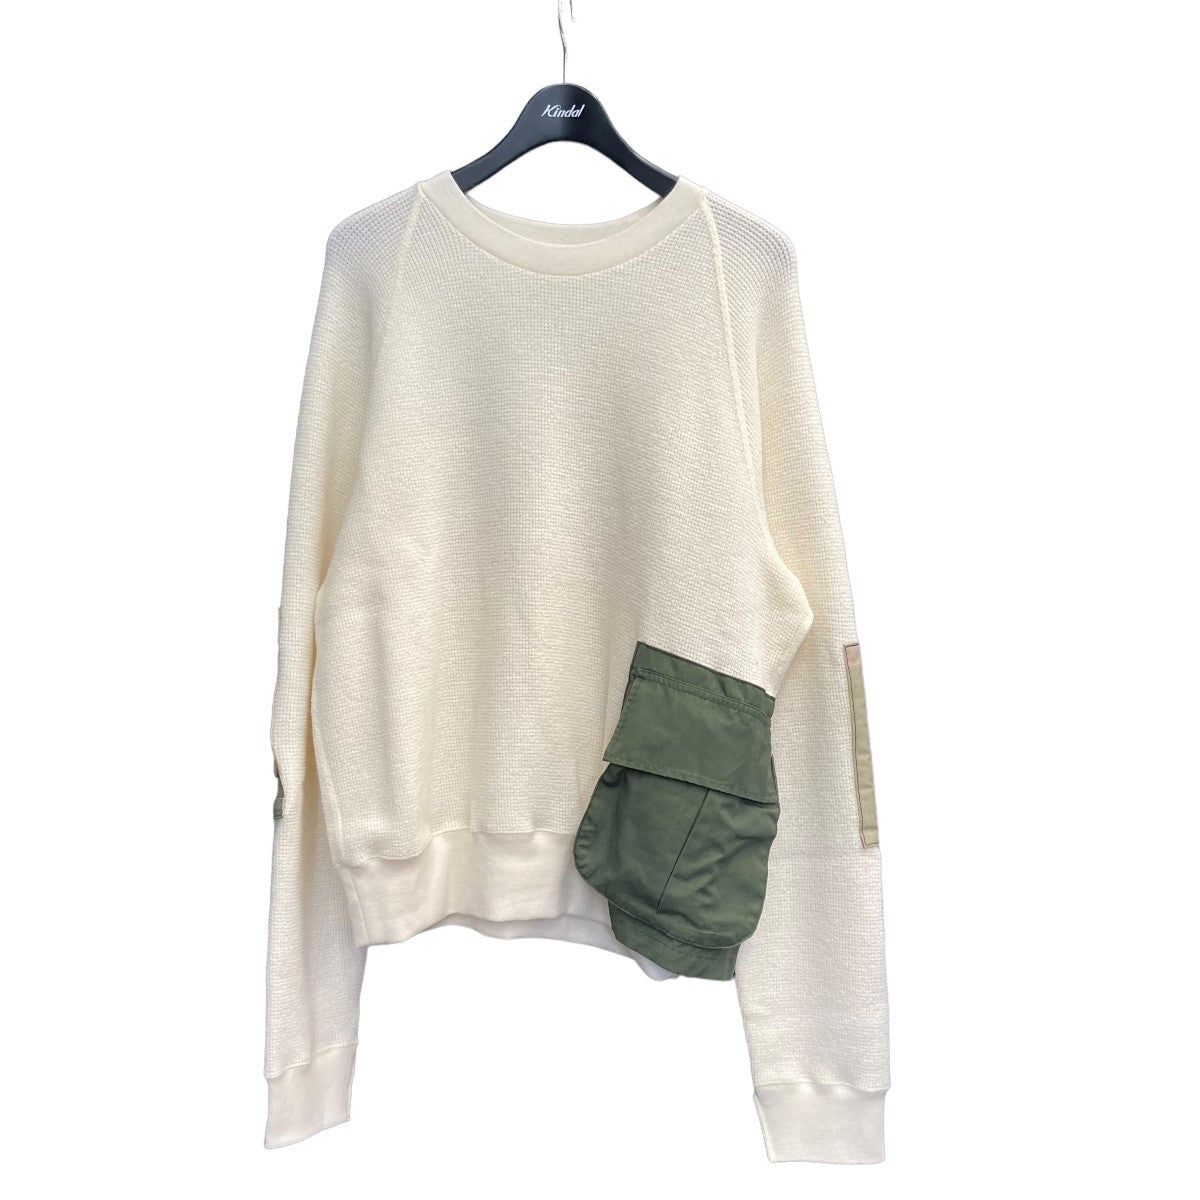 SUNSEA(サンシー) 22AWARMY PATCH THERMAL SWEATERミリタリーパッチ 